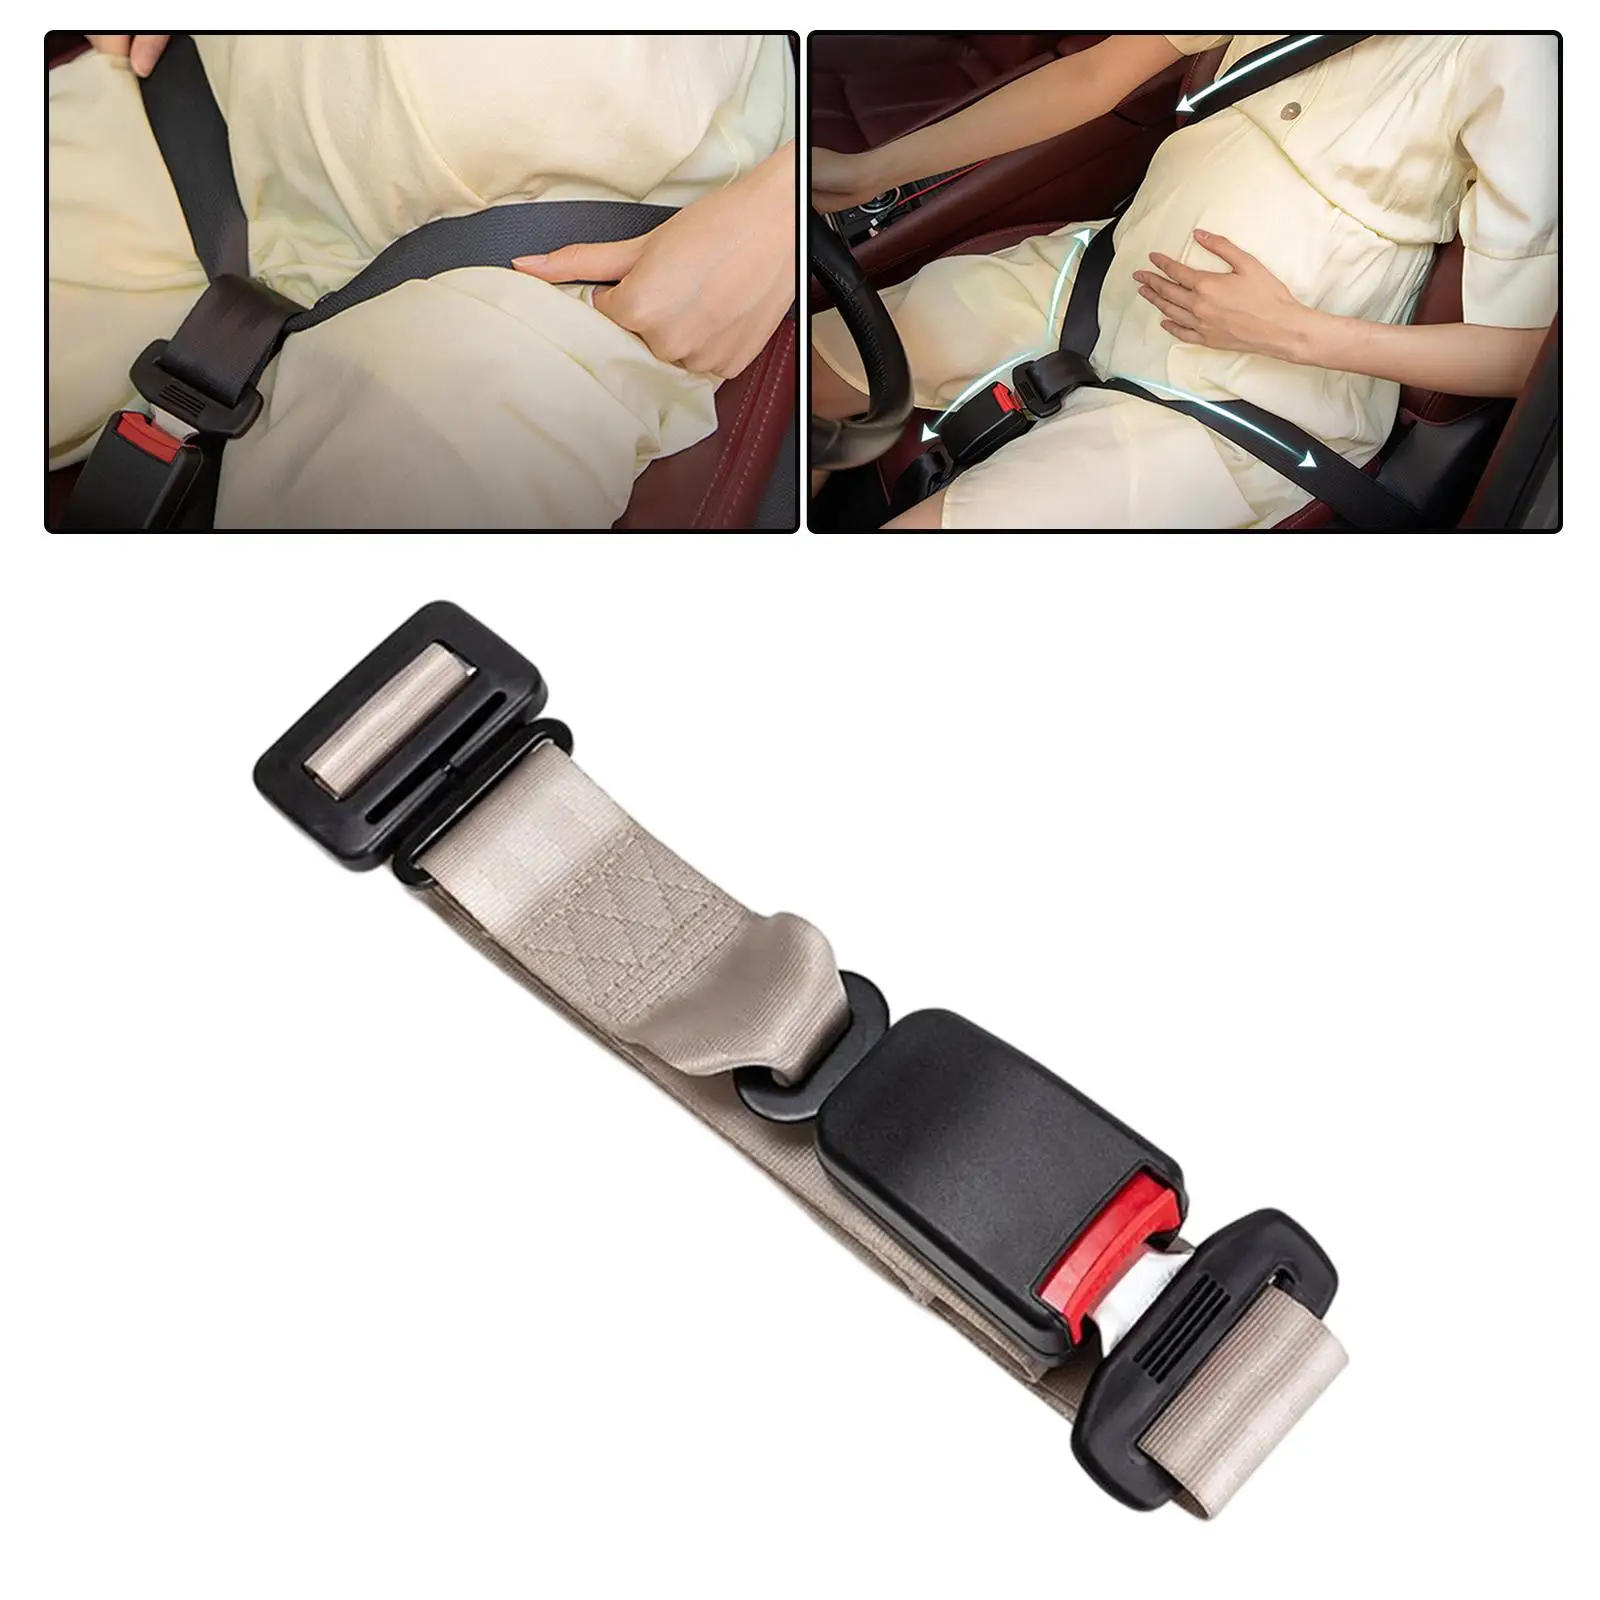  Car Seat Safety  Accessories Seat Bump Strap for  Moms